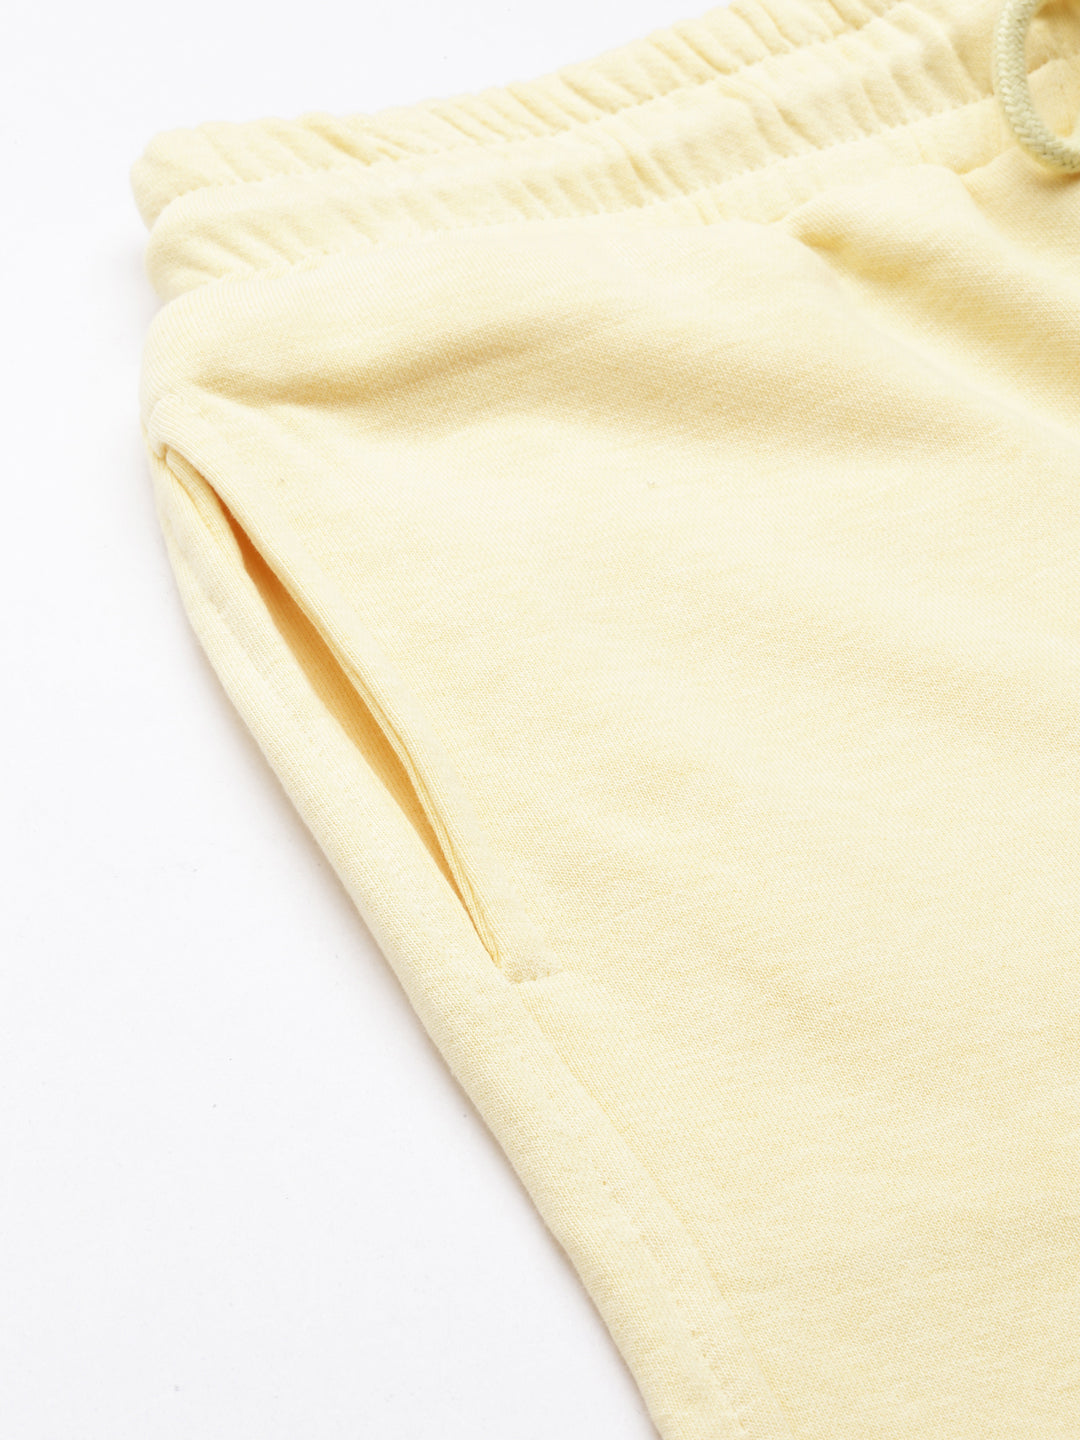 Women Yellow Solid Track Pant